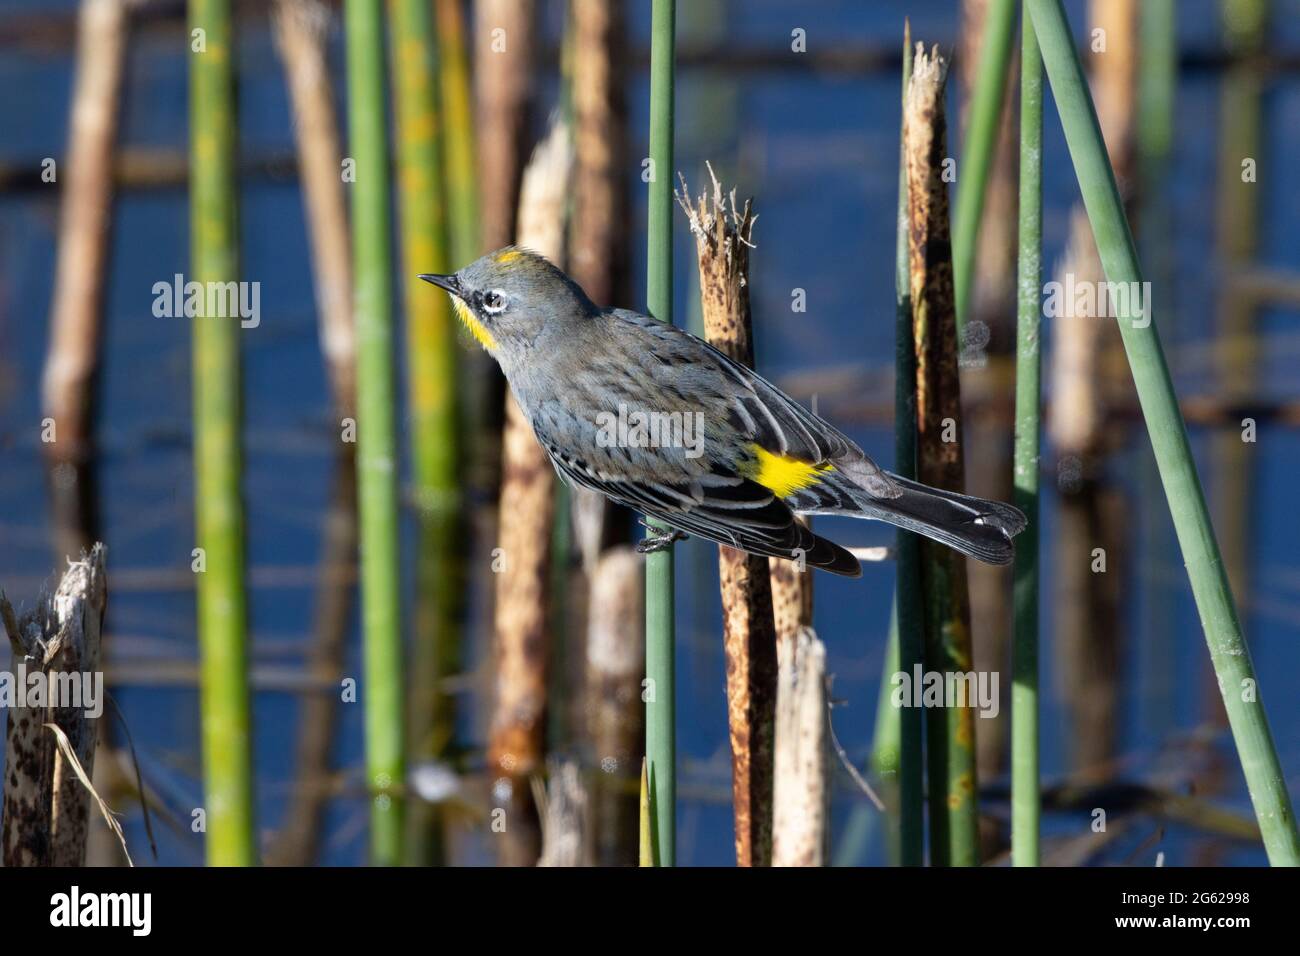 A male Yellow-rumped Warbler, Dendroica coronata, perched on a bulrush stem at California's Merced National Wildlife Refuge. Stock Photo